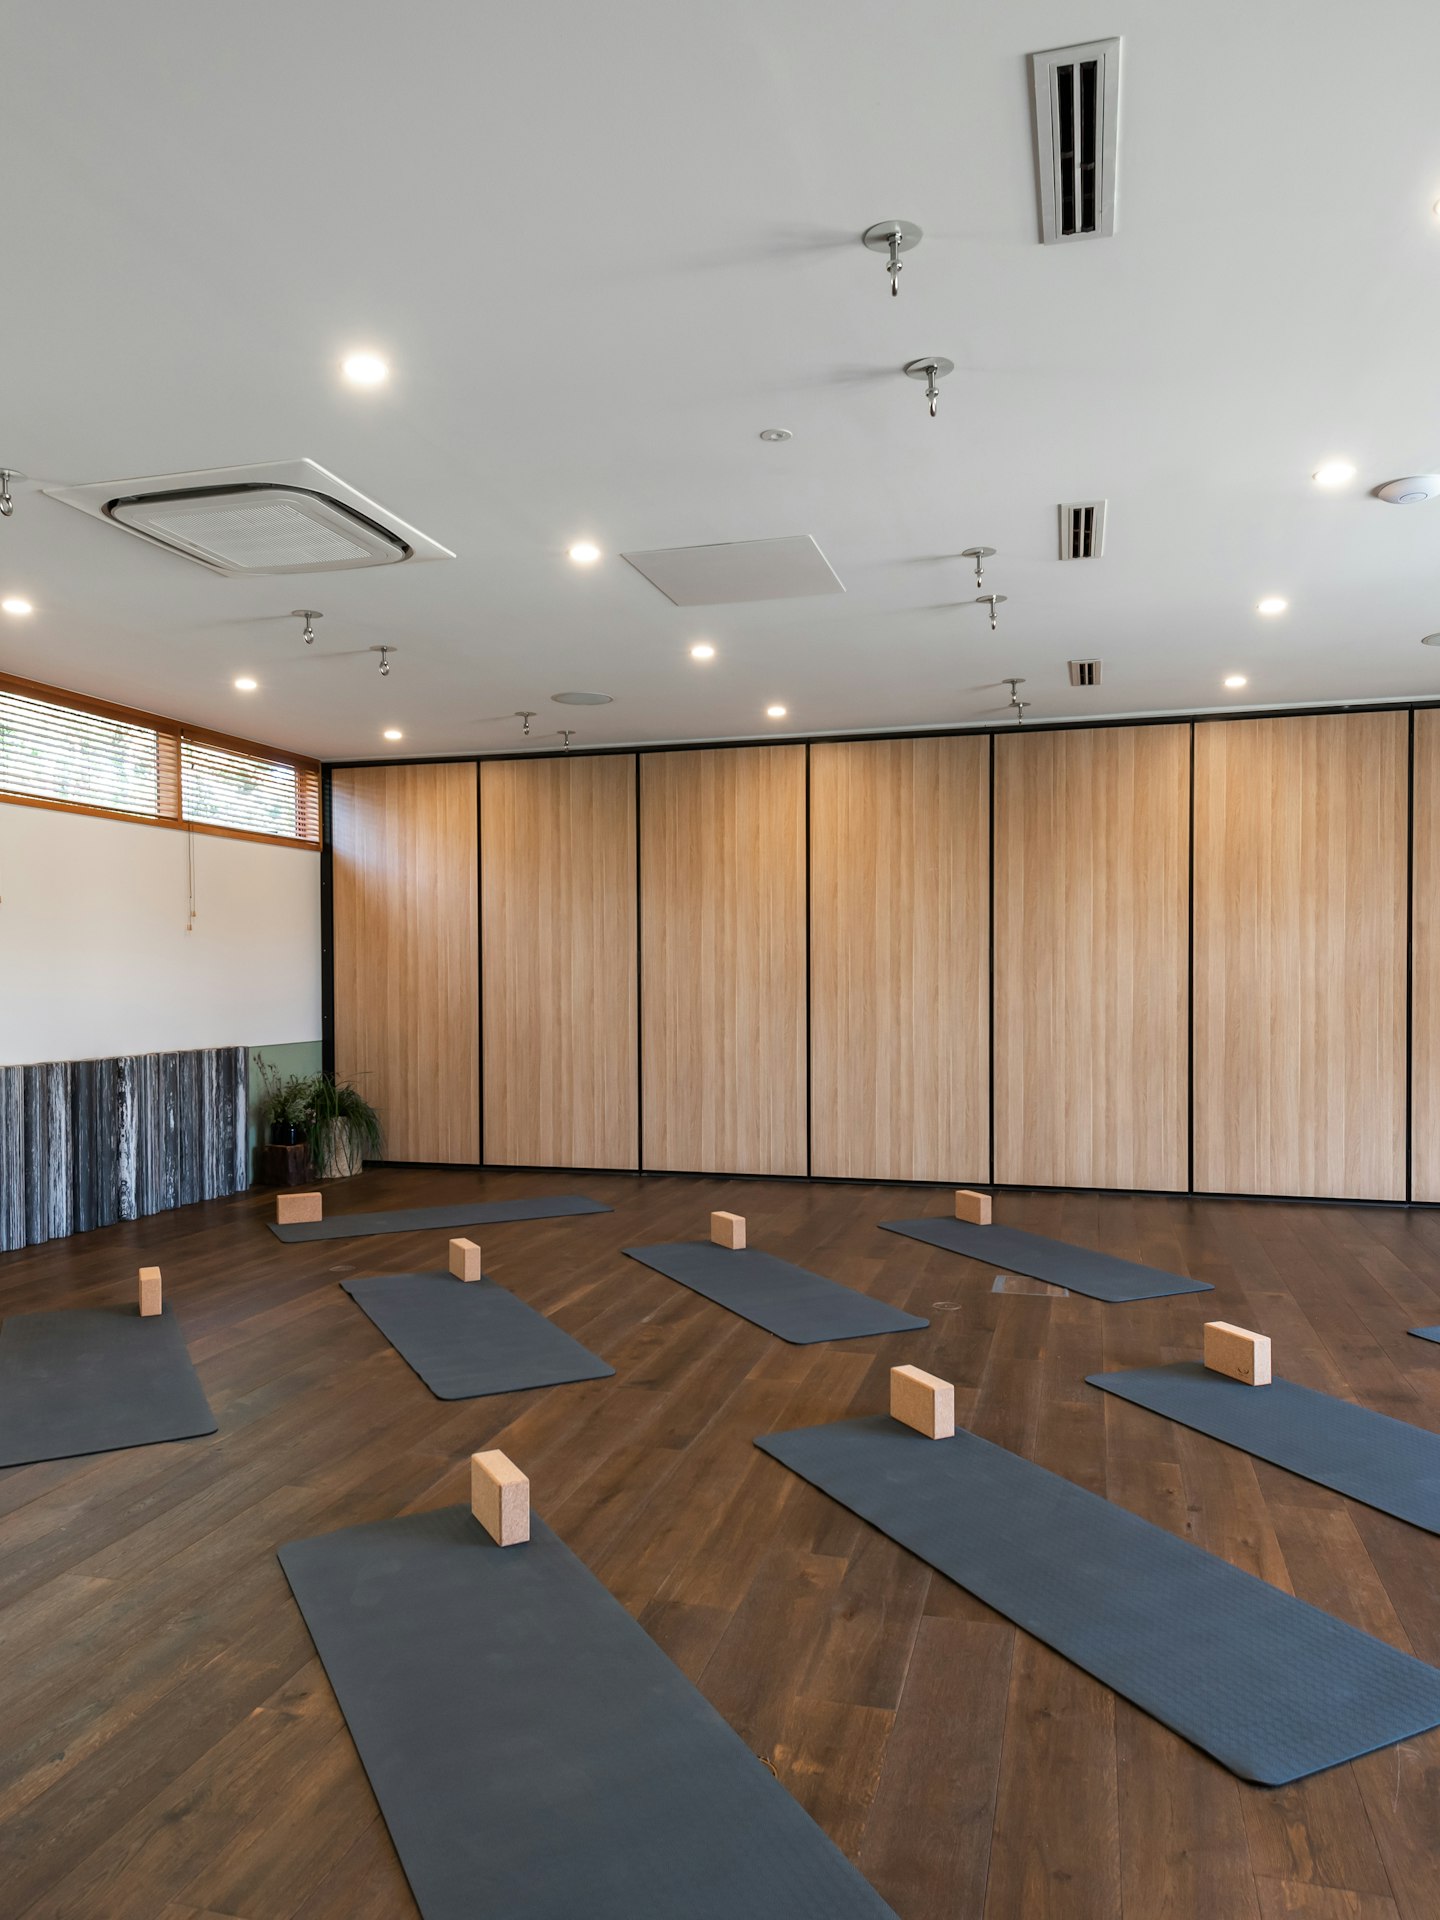 large indoor space set up with yoga mats and blocks for a group